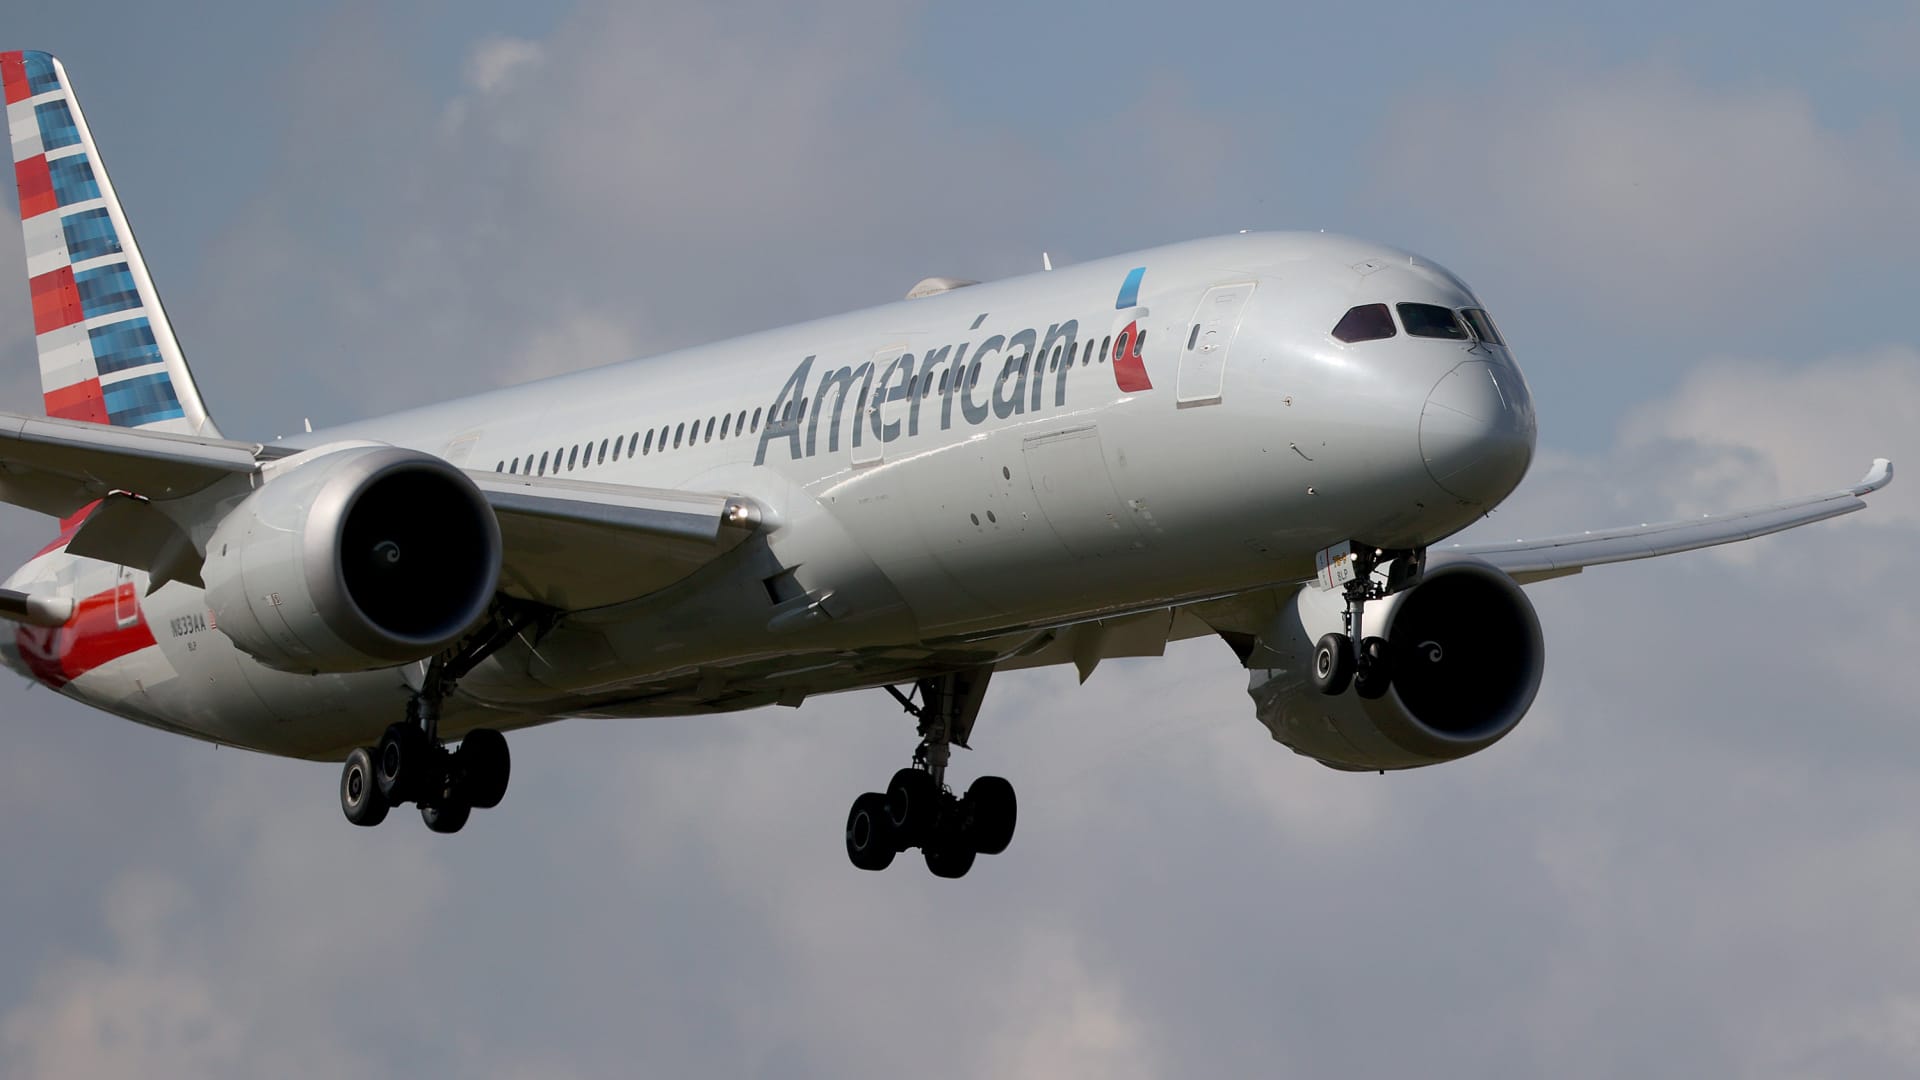 American Airlines pilots receive triple pay for trips that fall into planning errors